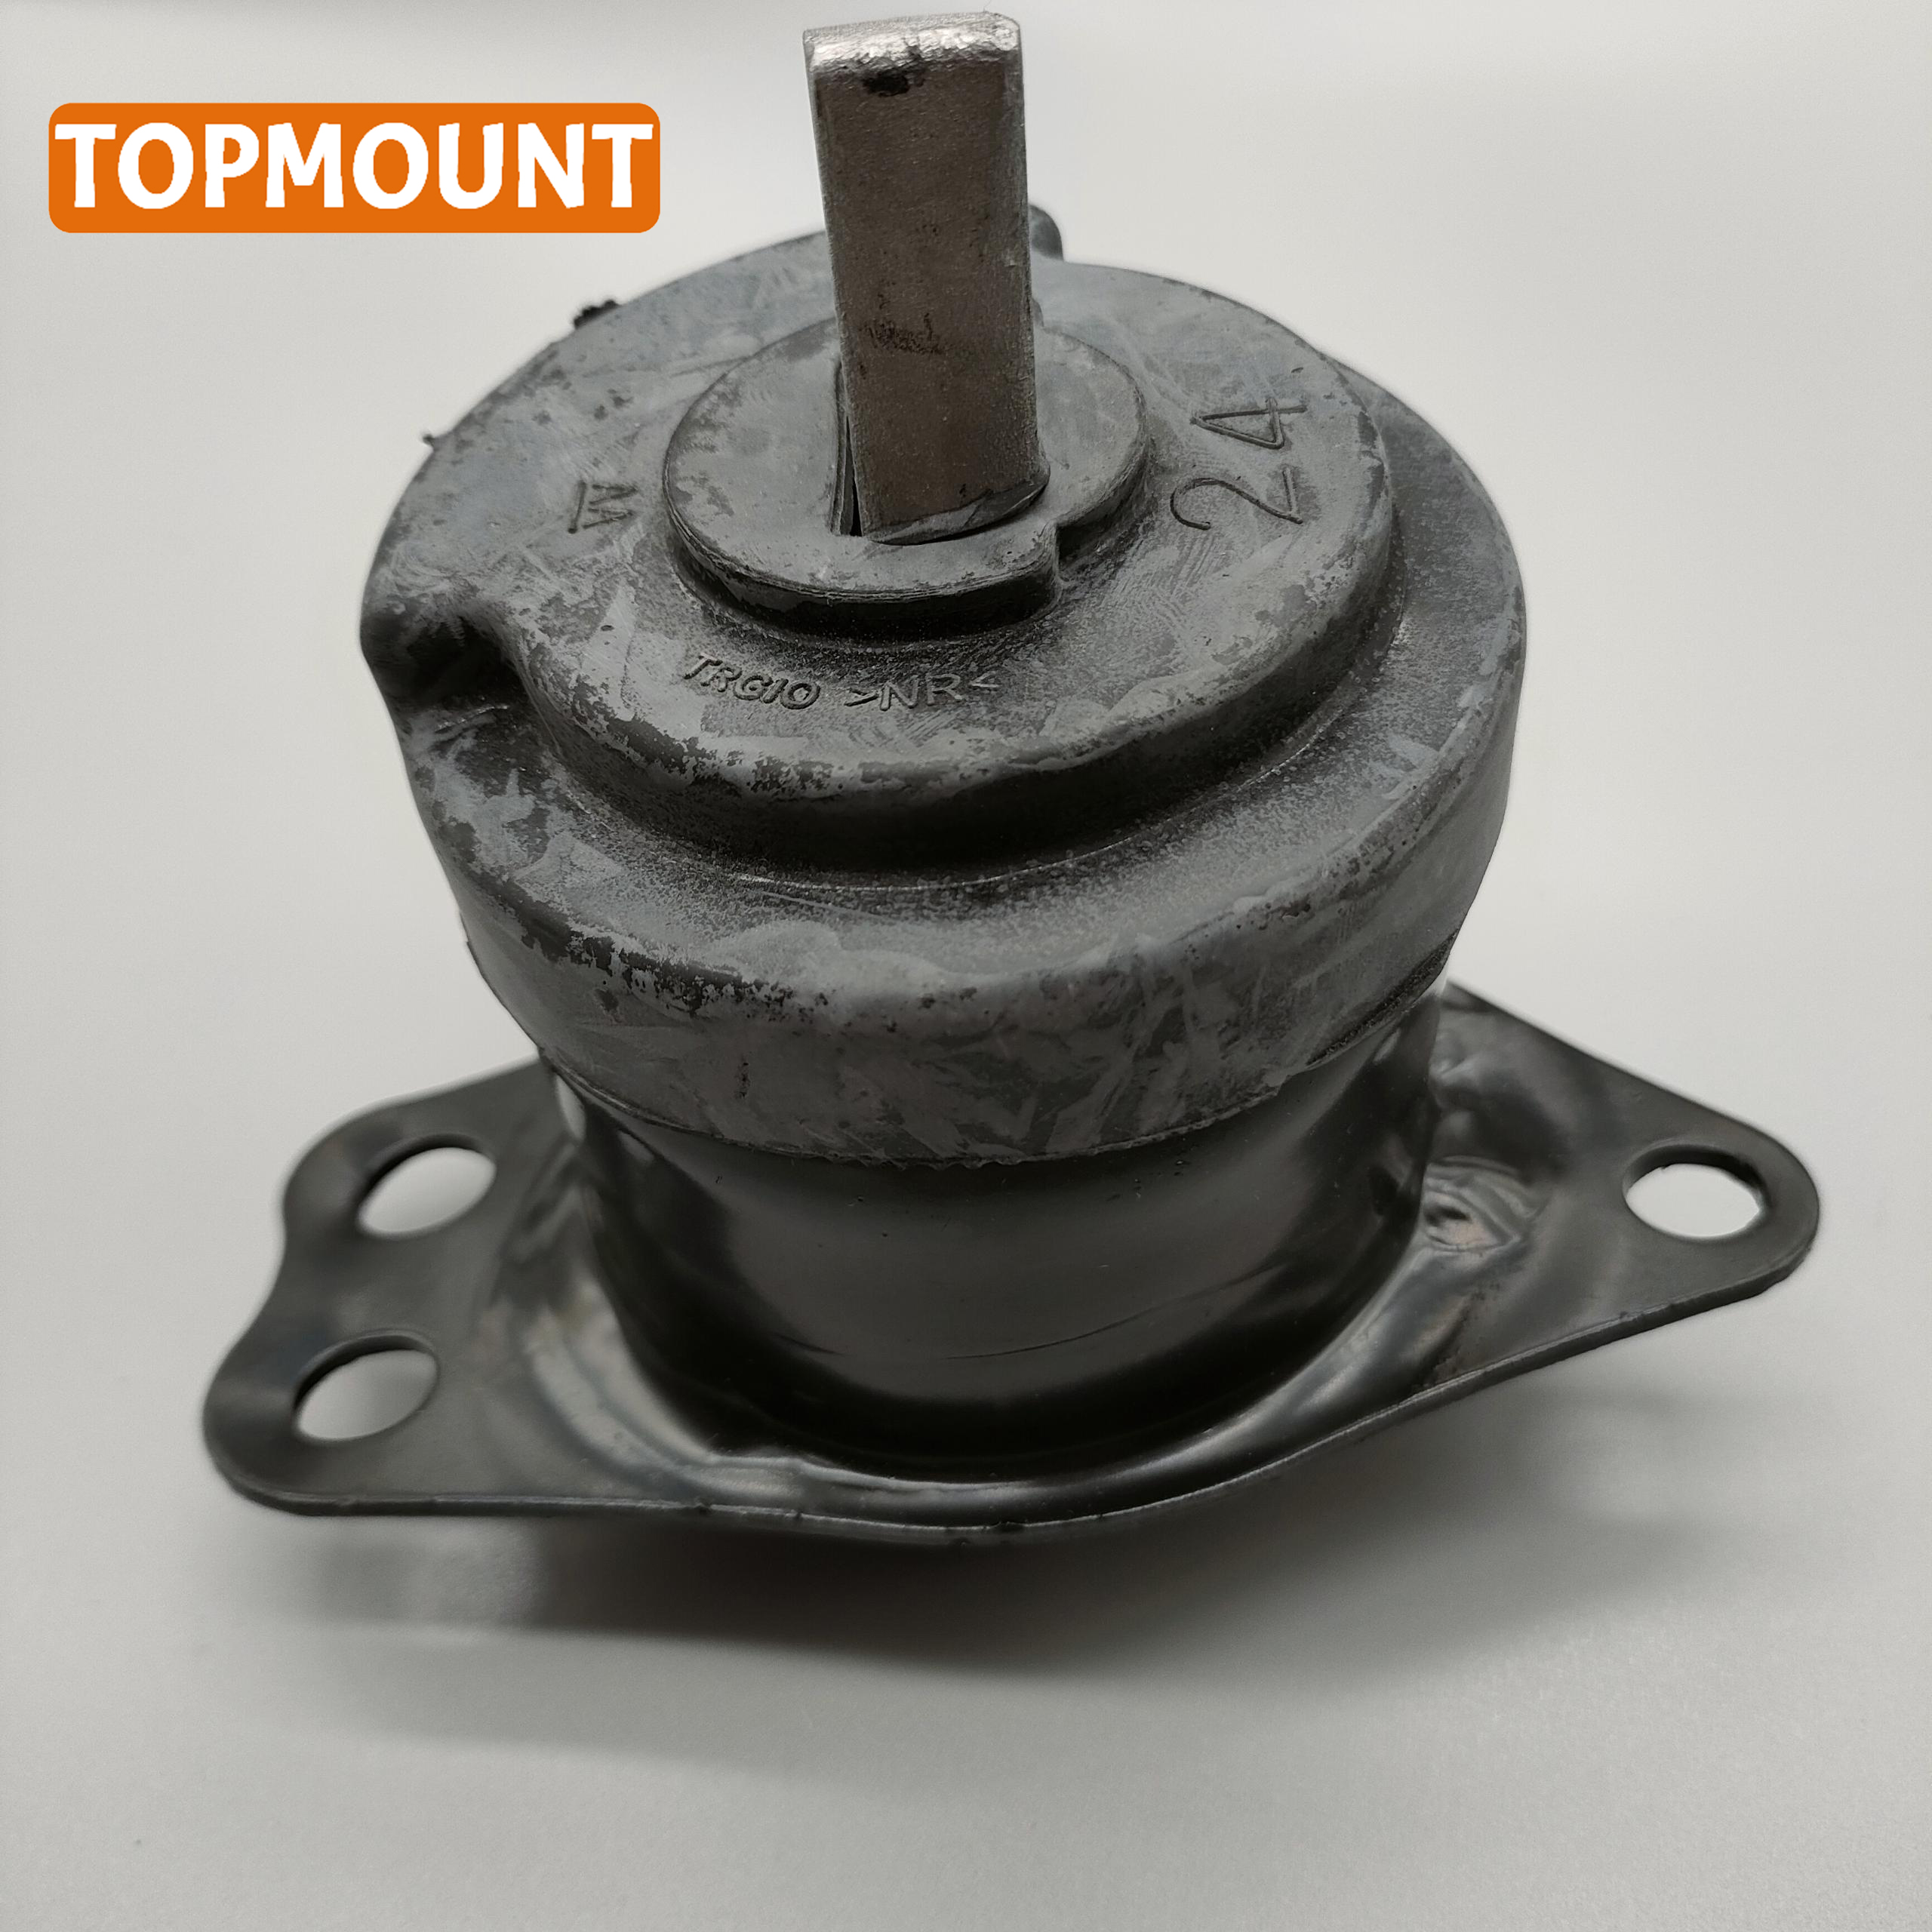 TOPMOUNT 50820-T2F-A01 50820T2FA01 Engine Mount Engine for HONDA ACCORD 2014-2016 Featured Image